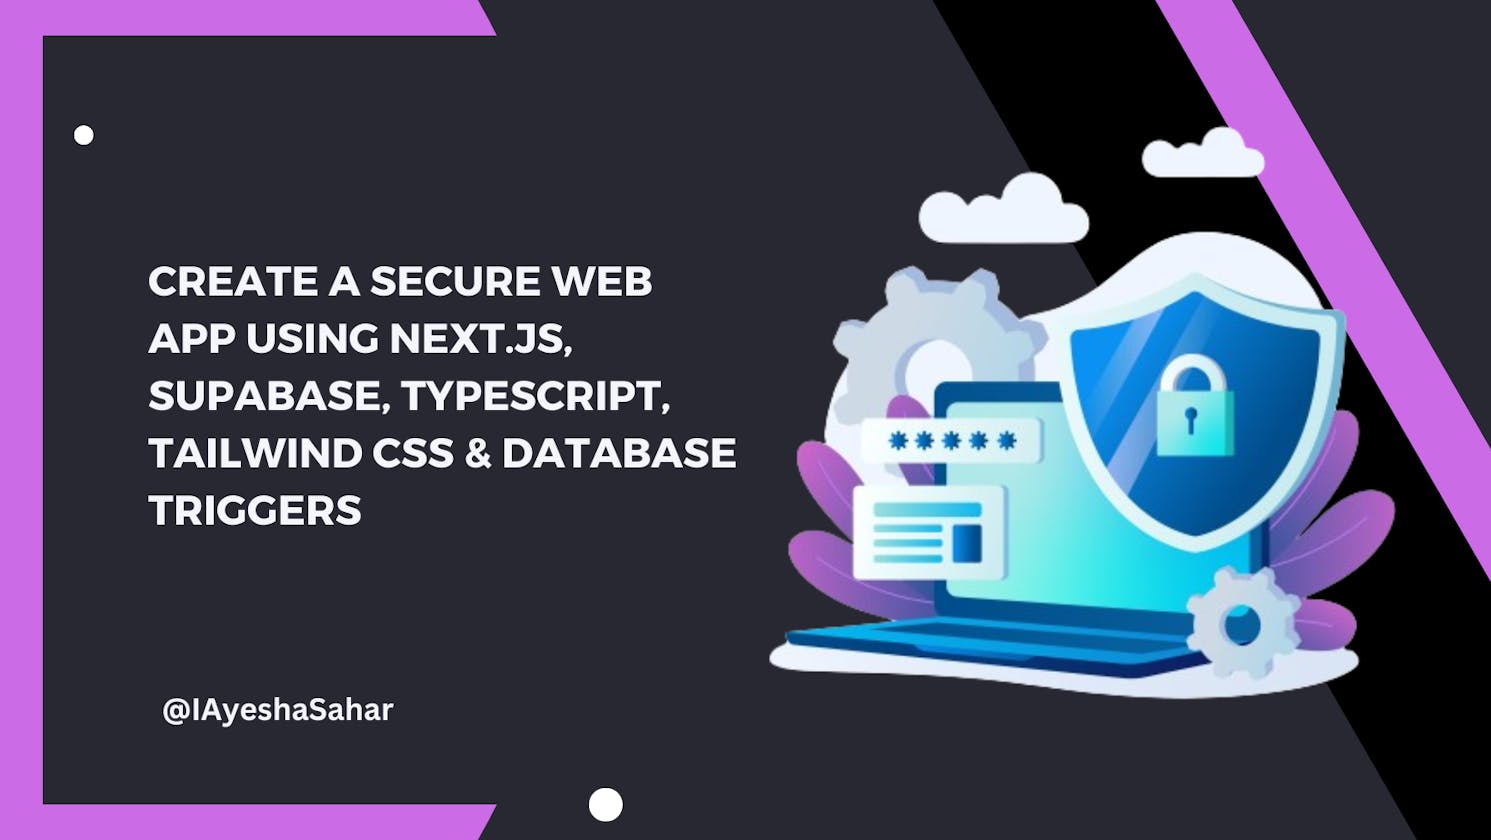 Complete Guide to a Secure Web App using Next.js, Supabase, TypeScript, Tailwind CSS & Database Triggers